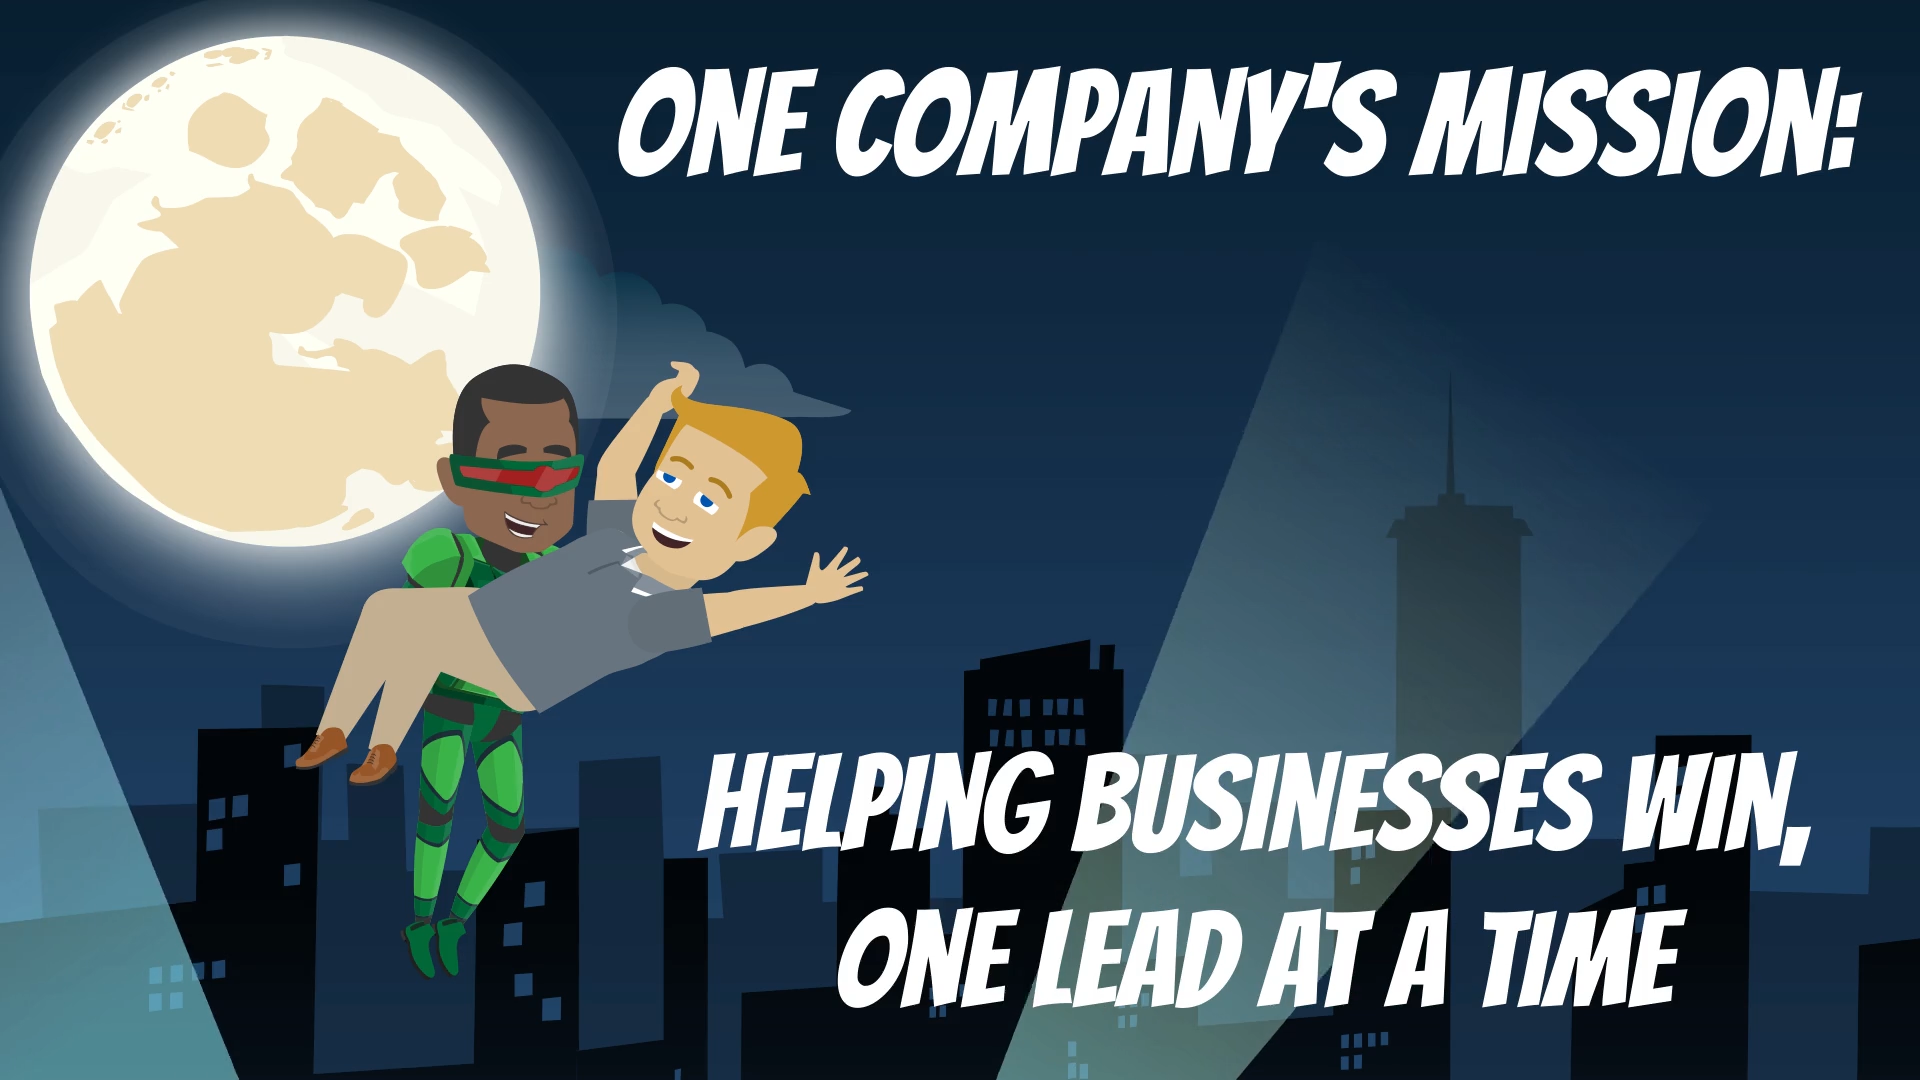 Helping businesses win one lead at a time